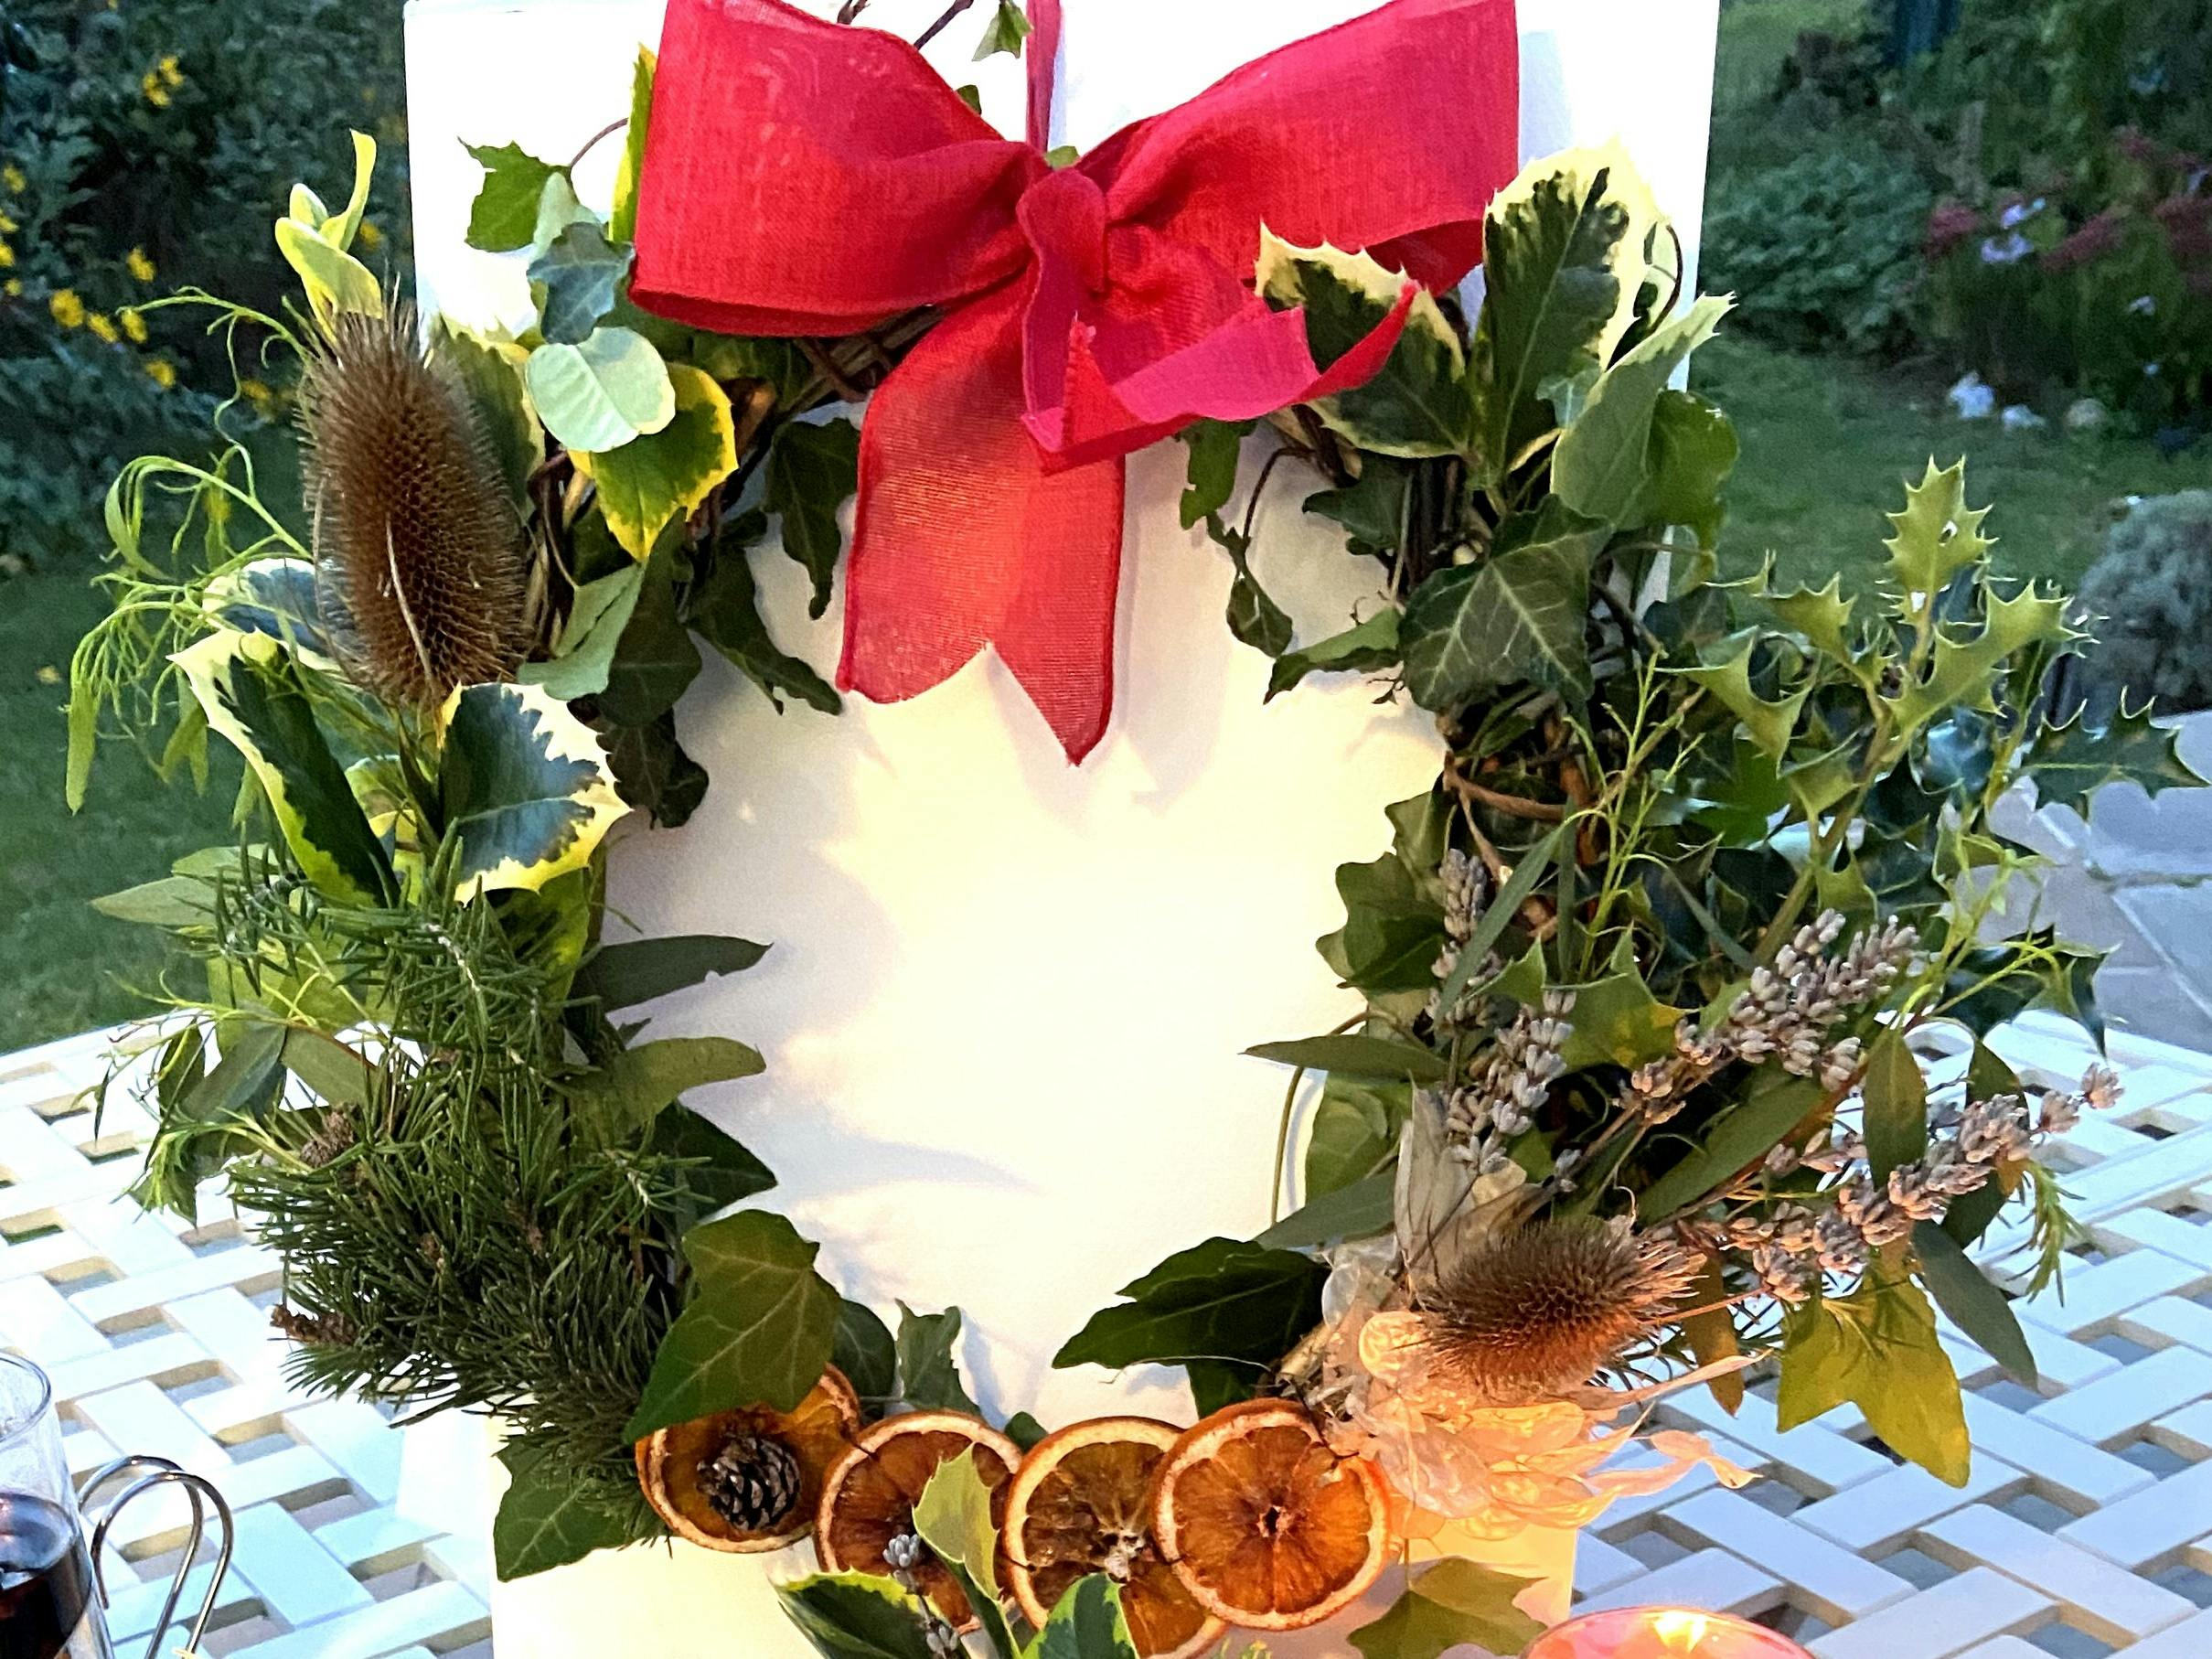 Chrismas wreath with dried orange slices, red ribbon and thistle tufts